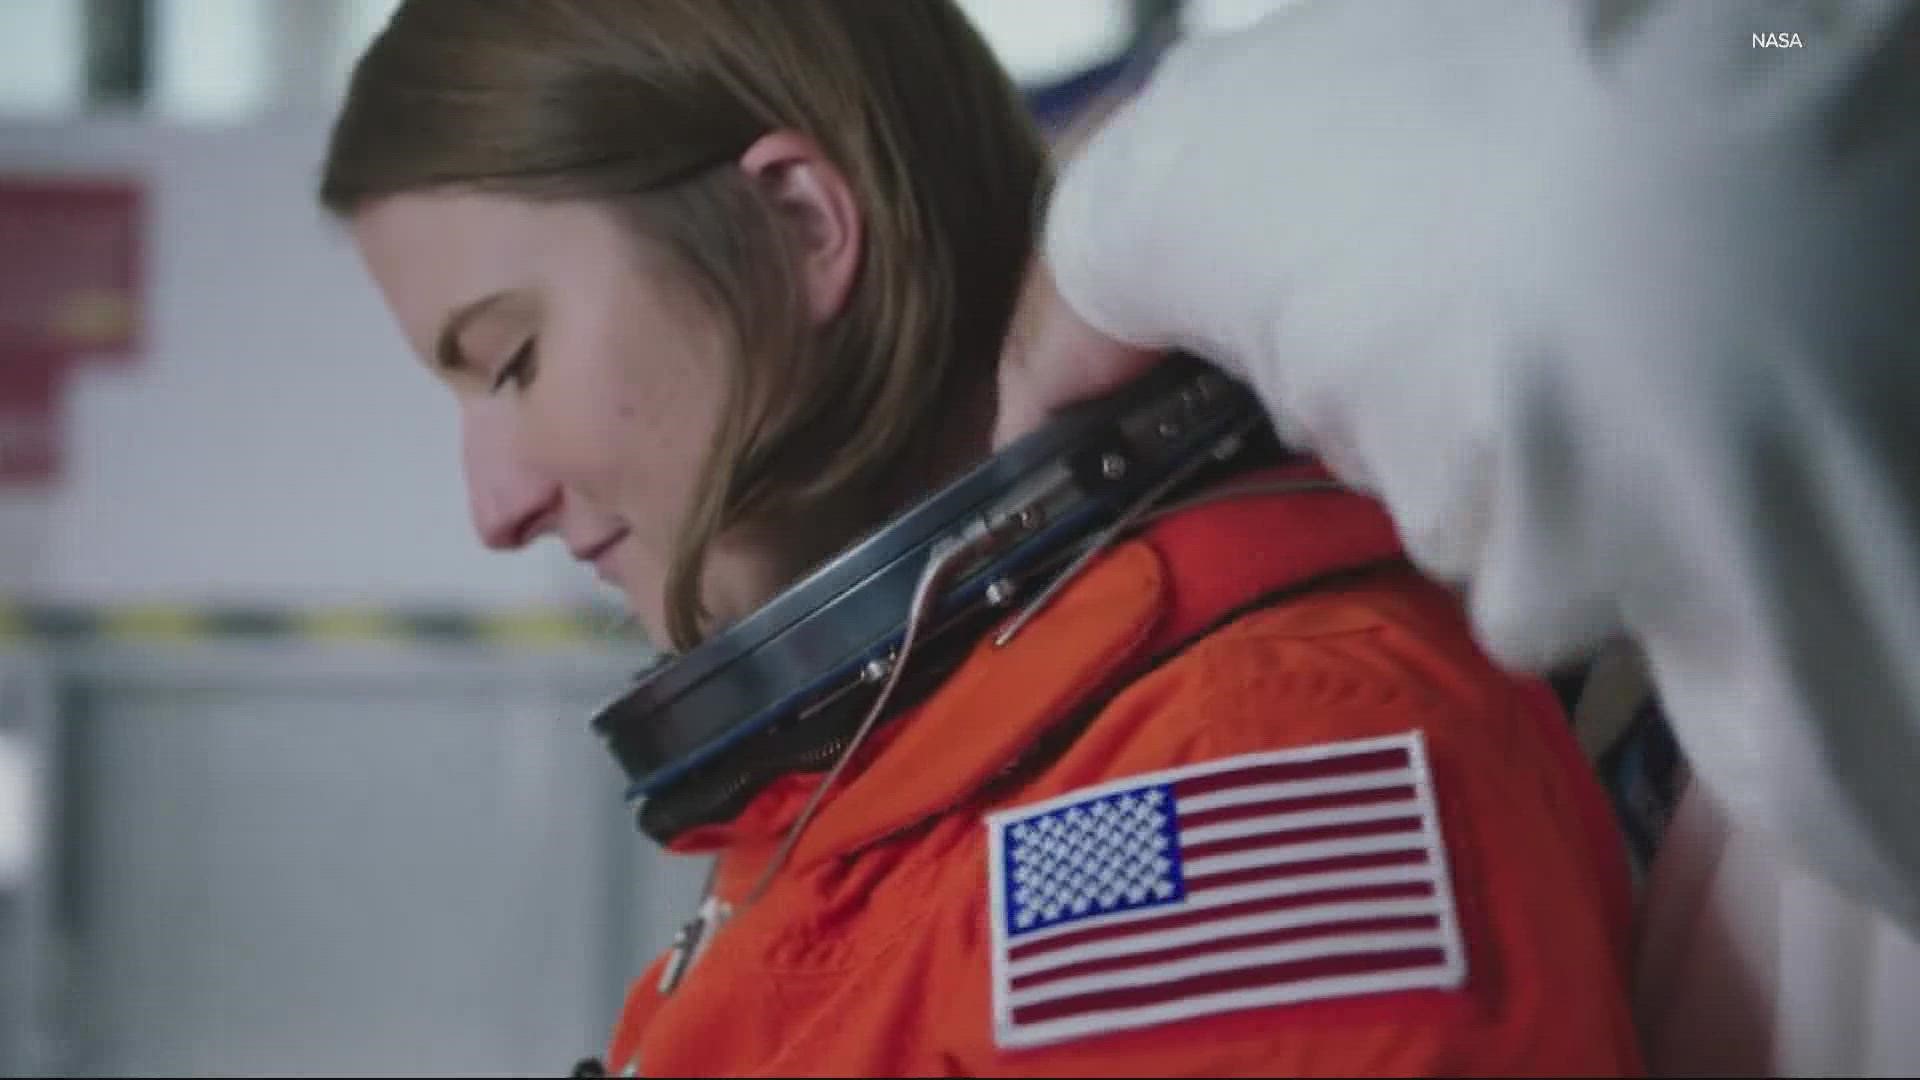 One of the newest astronauts aboard the ISS is Washington native Kayla Barron, from Richland. KGW's Devon Haskins spoke with her about her first flight into space.